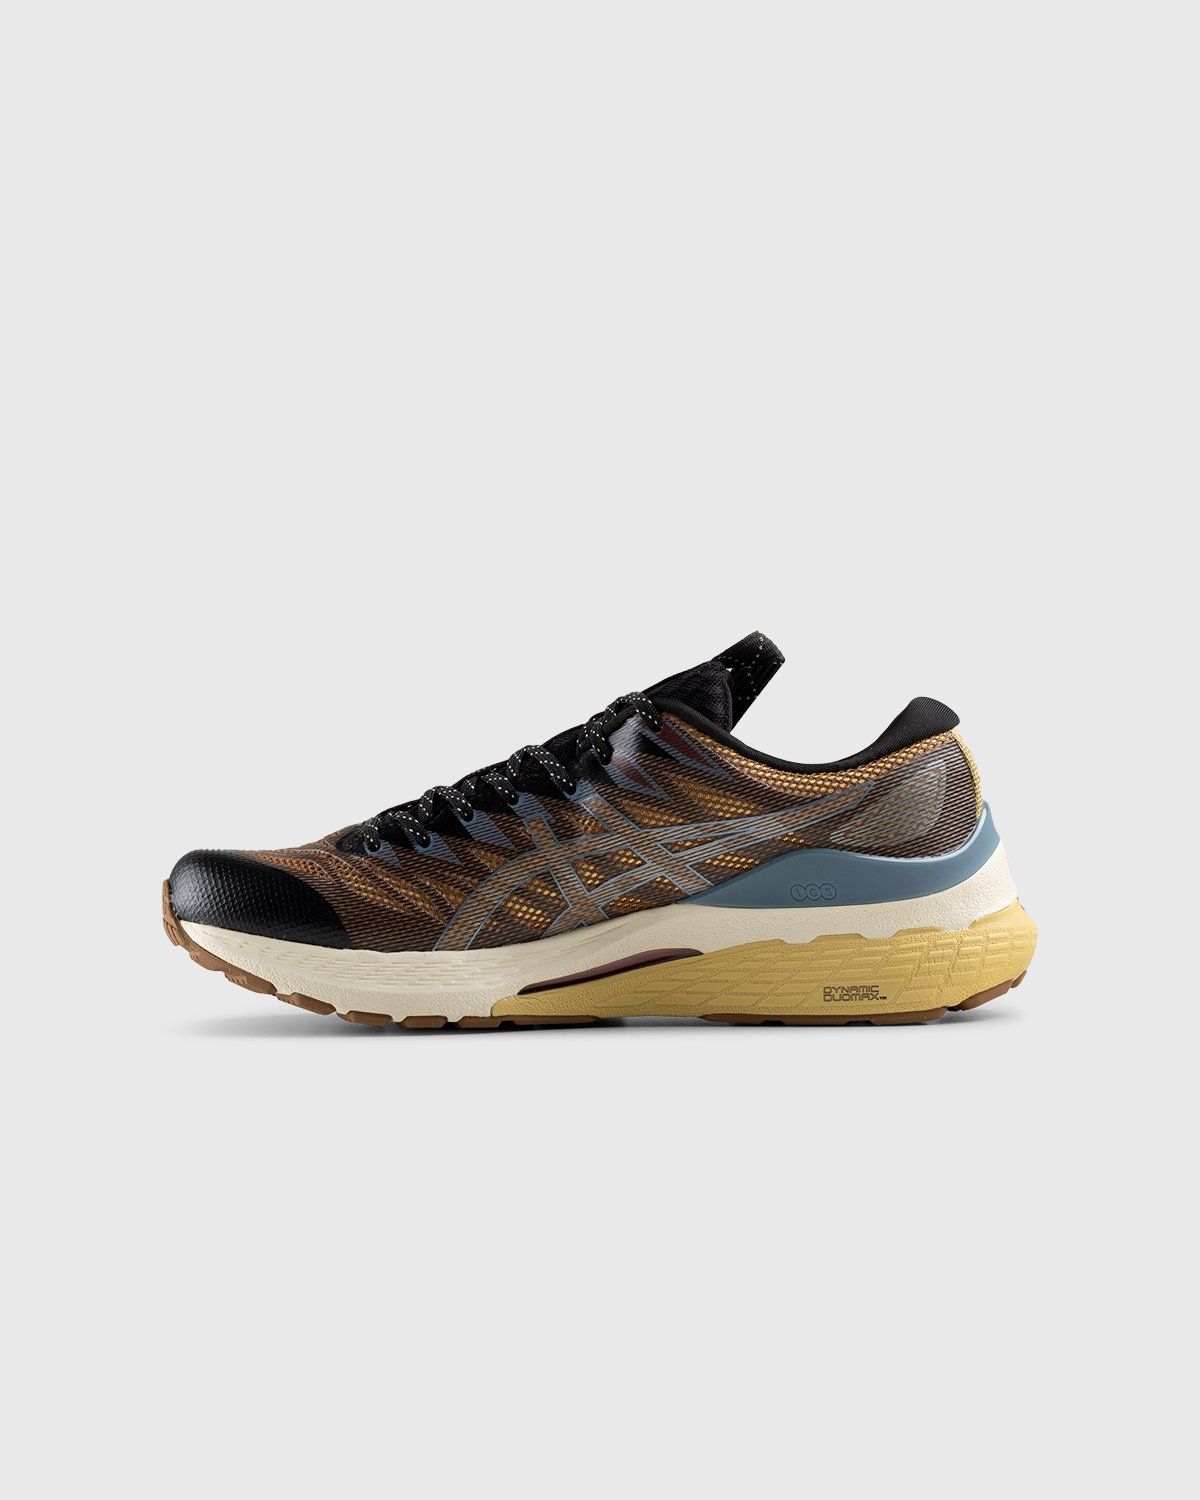 asics – FN3-S Gel Kayano 28 Anthracite/ Antique Gold - Low Top Sneakers - Yellow - Image 2